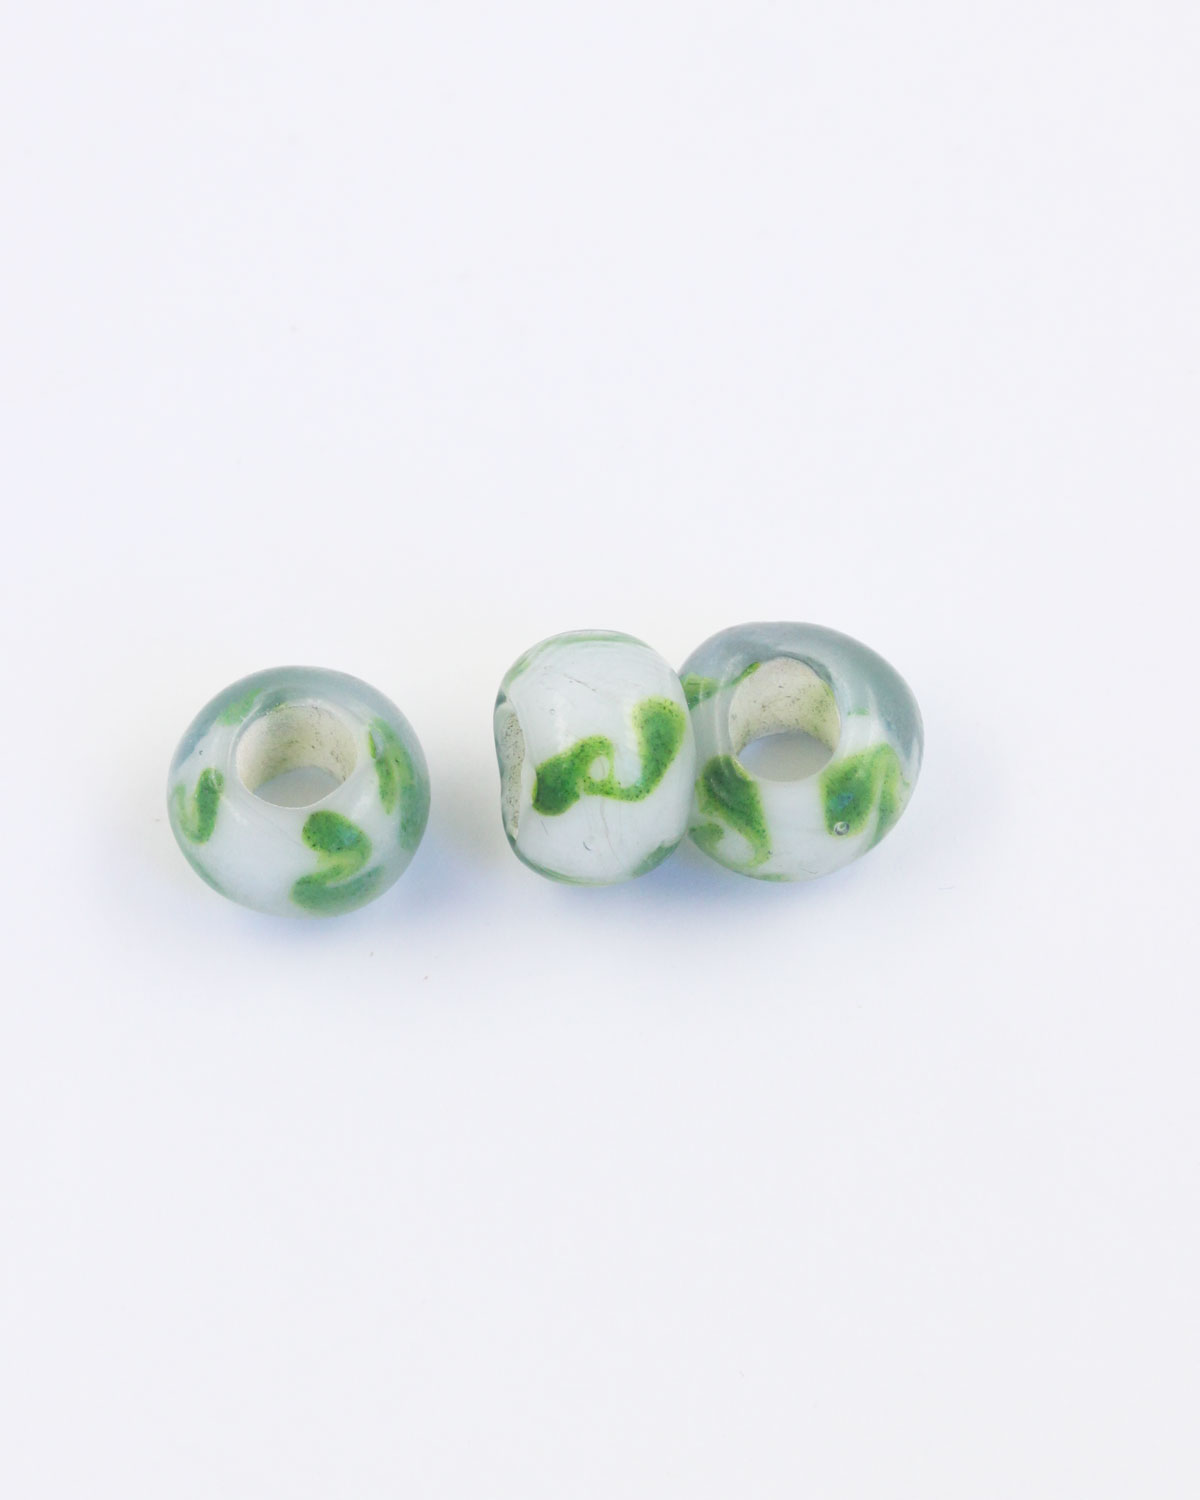 Large hole glass bead white with green swirl